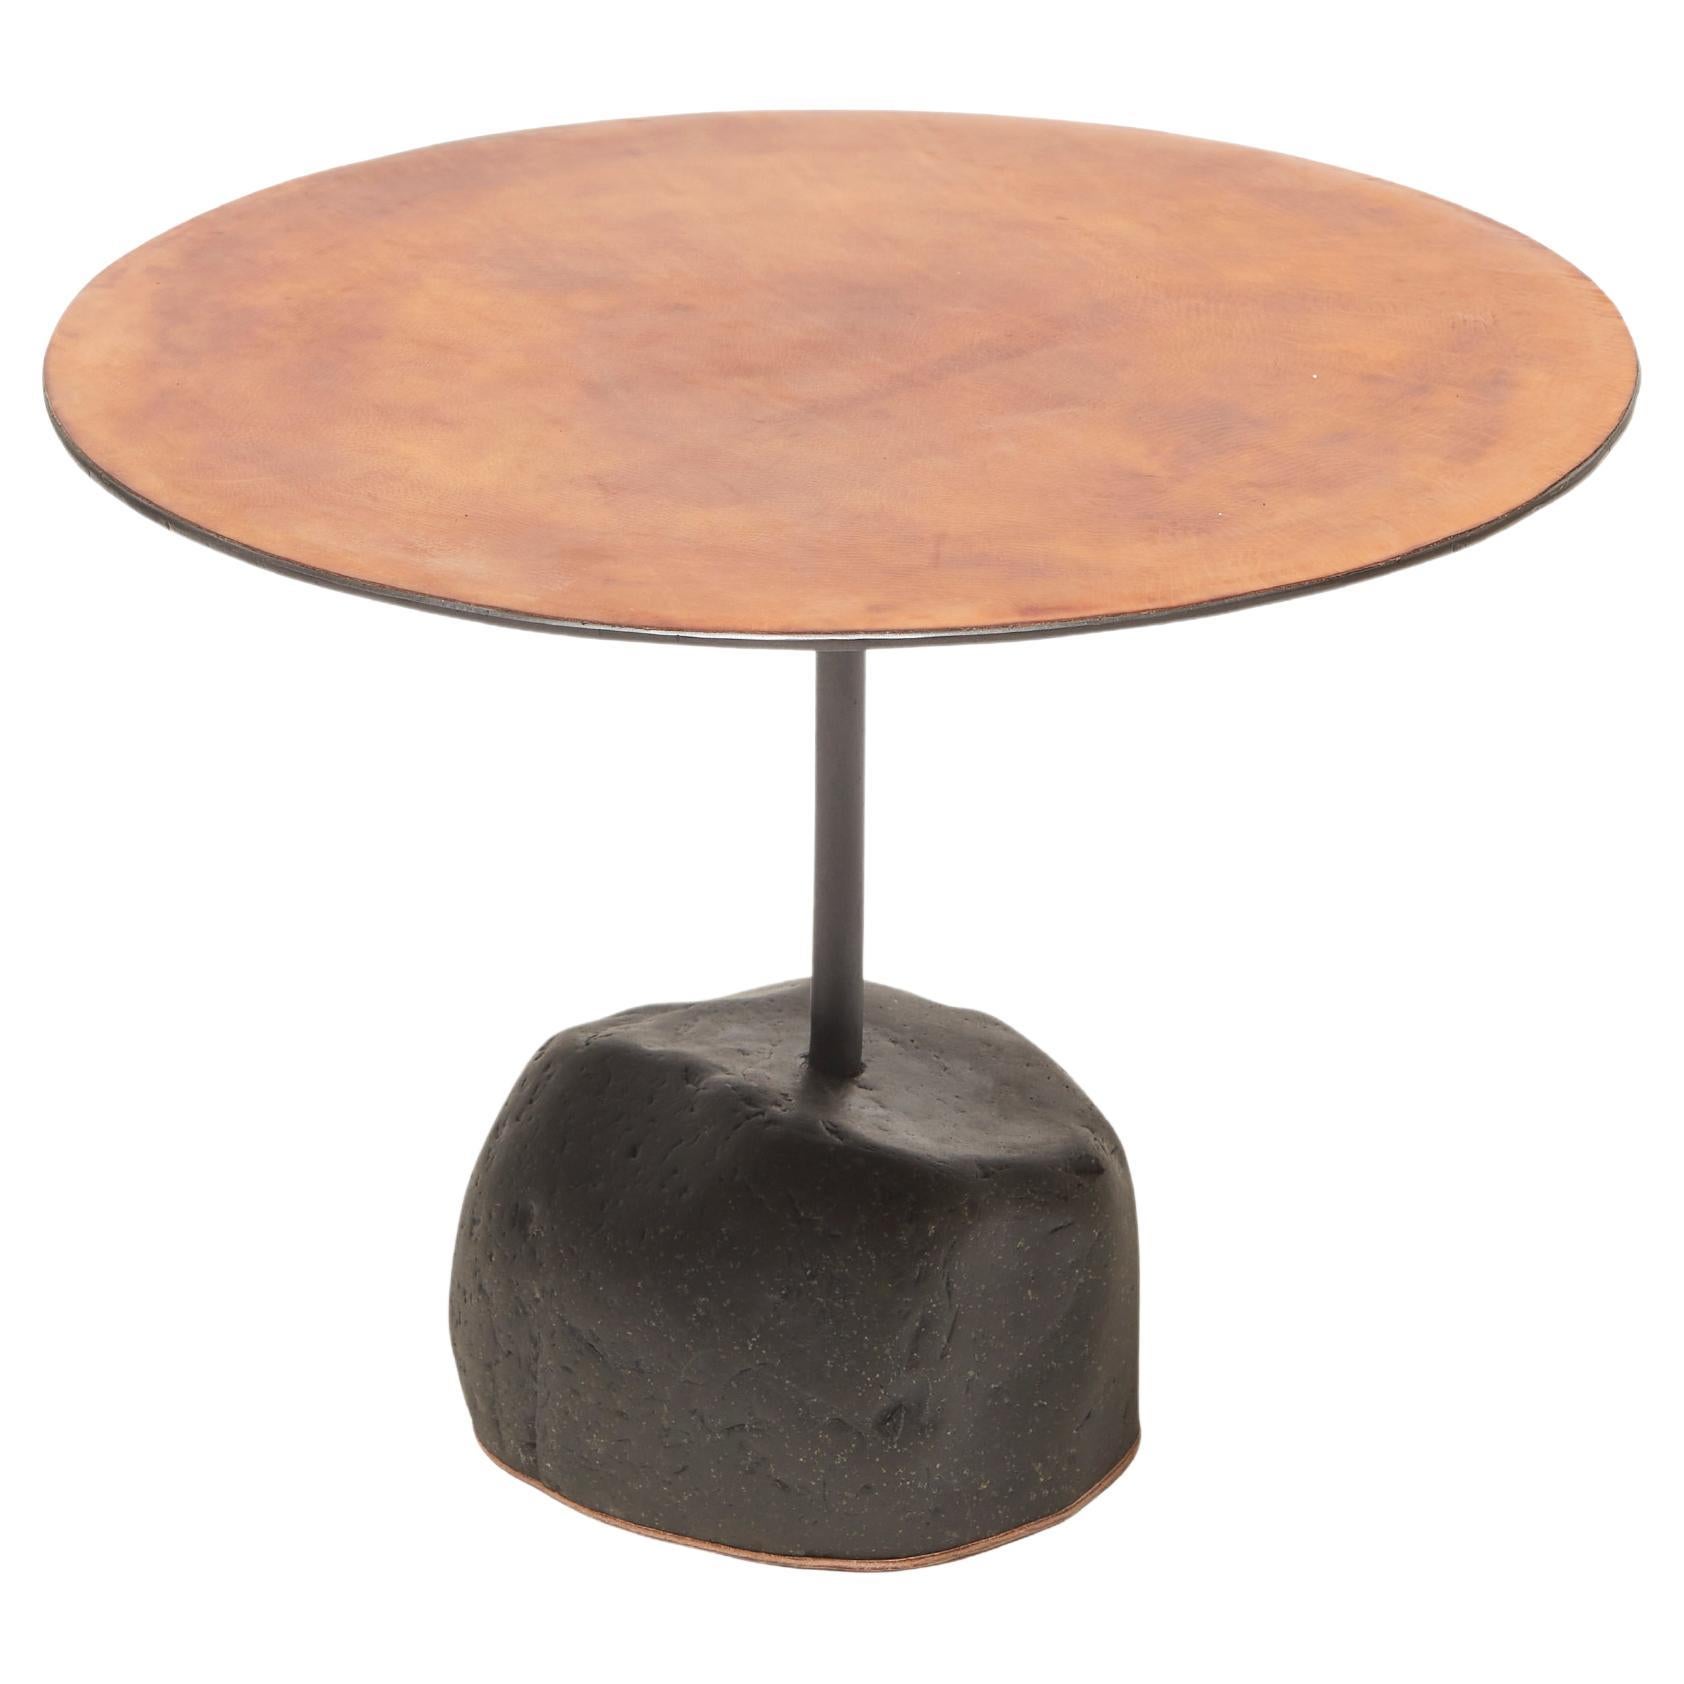 Table d'appoint circulaire de la collection Grounded 